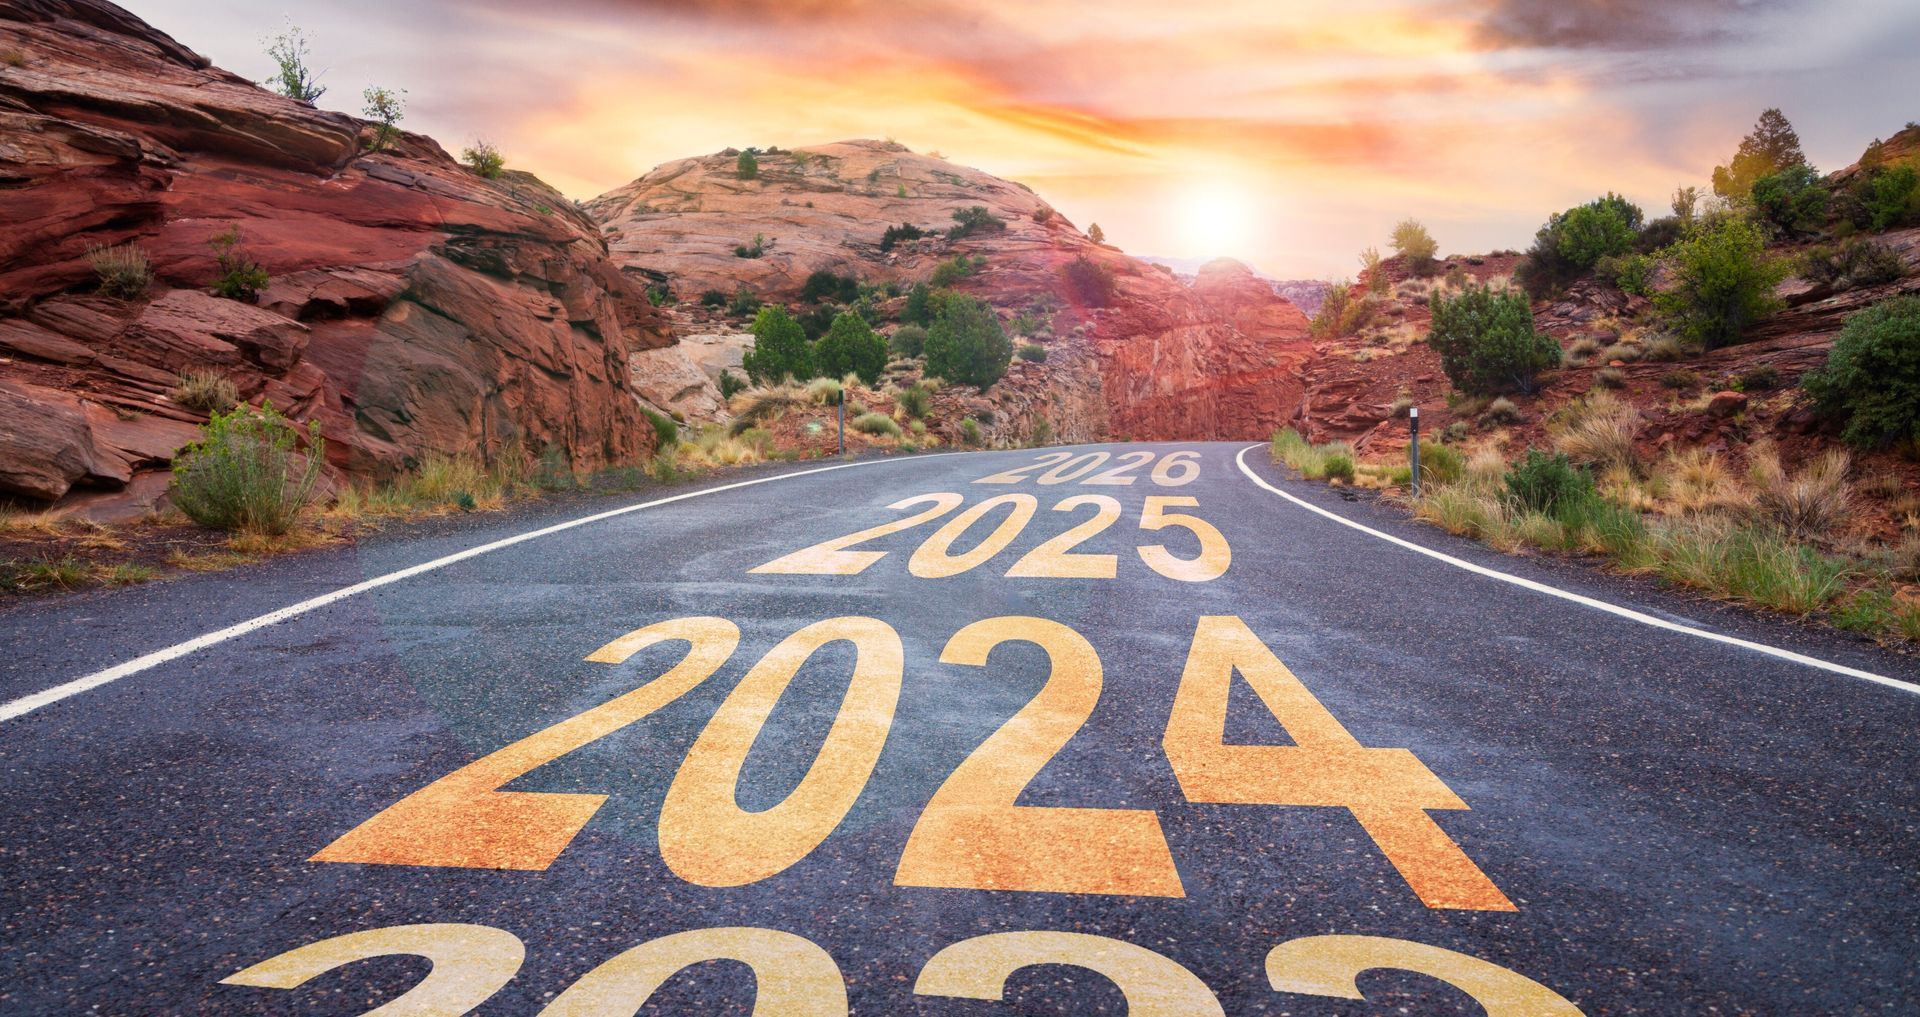 The year 2024 is painted on the side of a road.